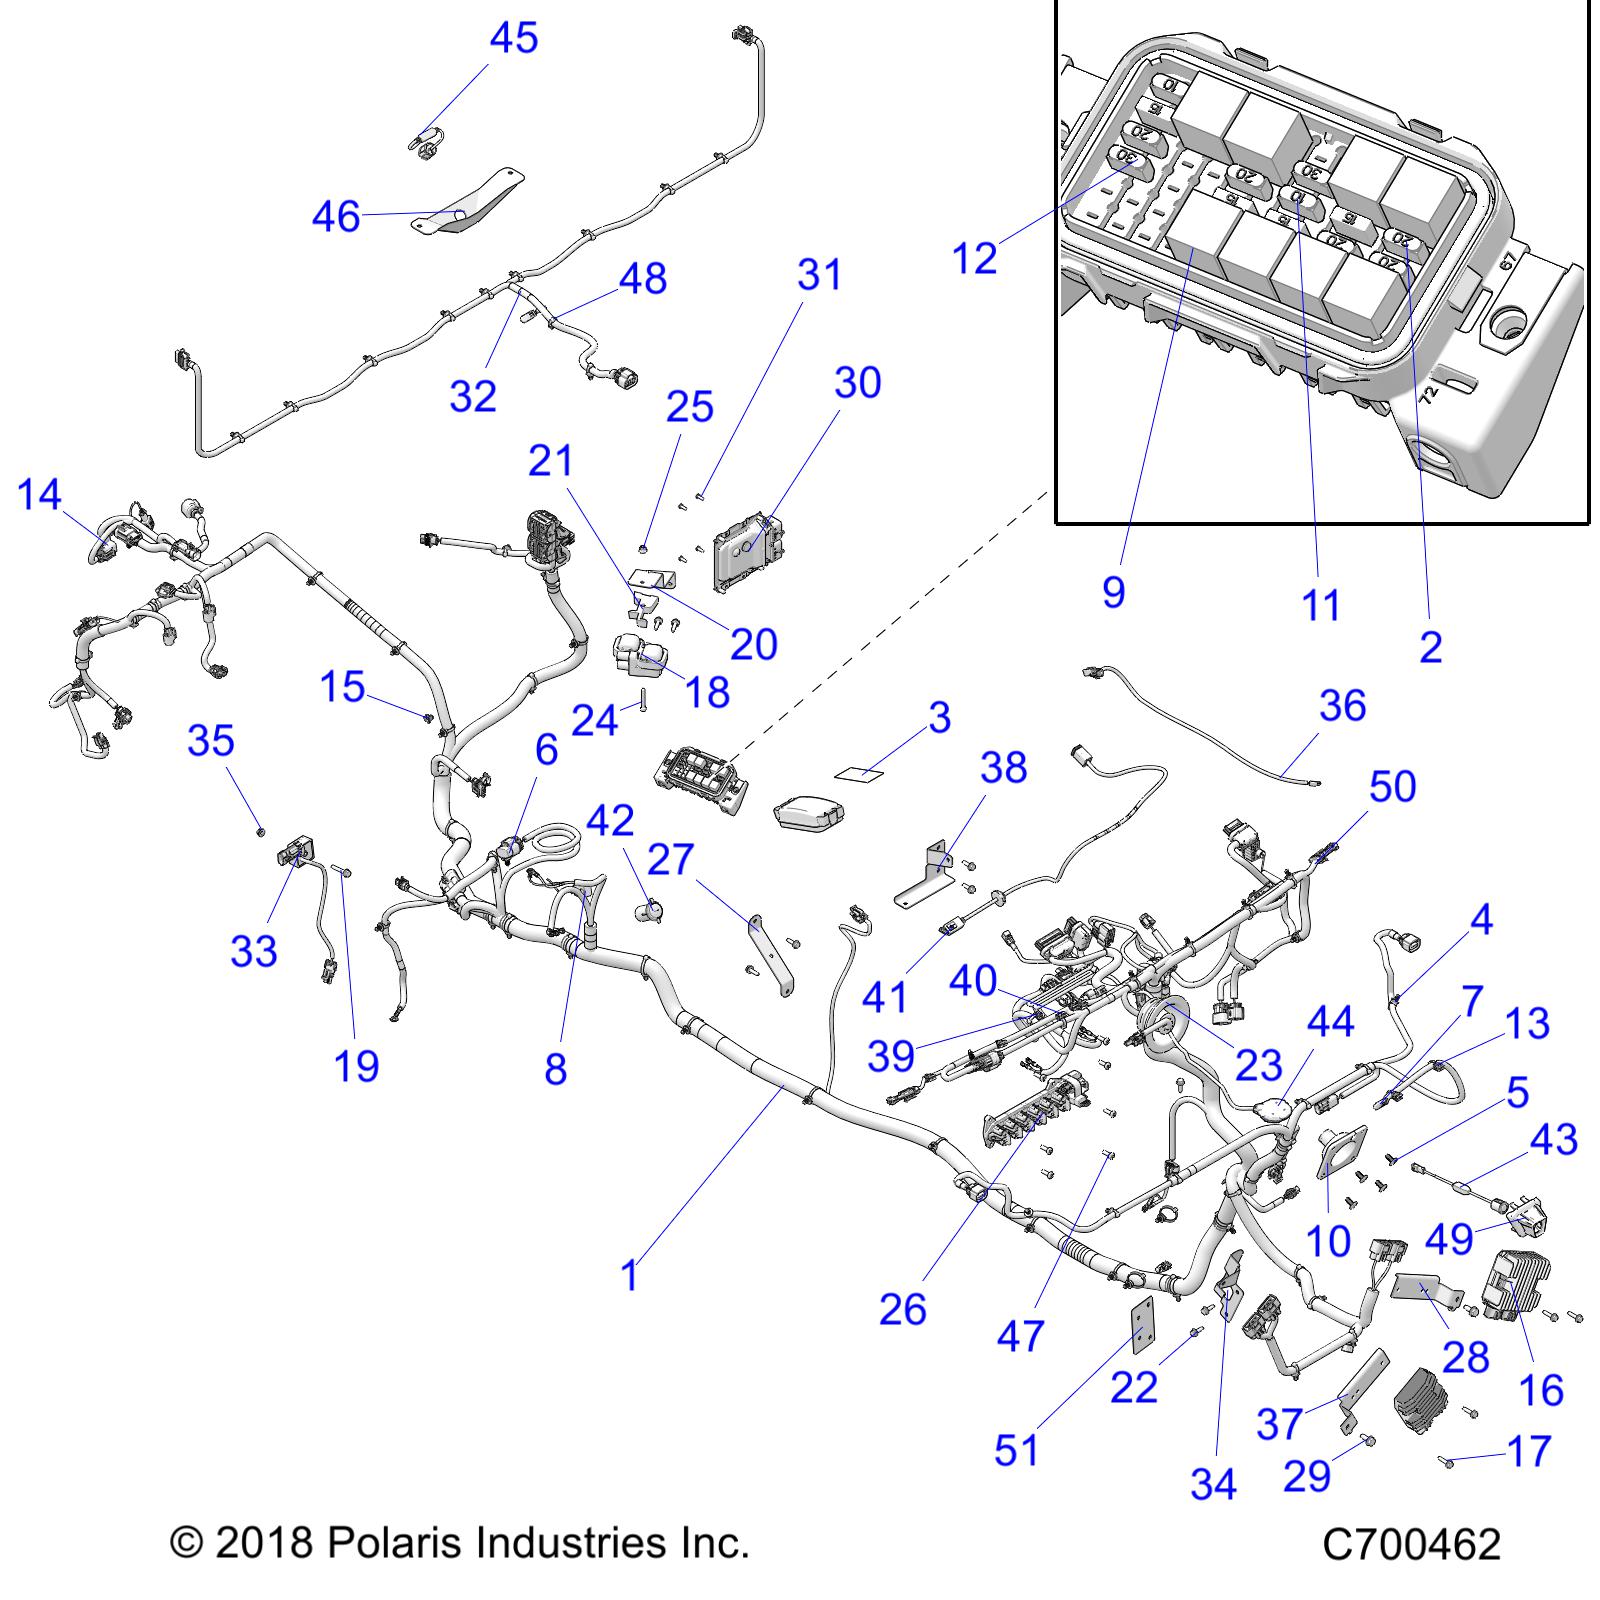 Part Number : 2414857 HARNESS-CHASSIS STD CREW